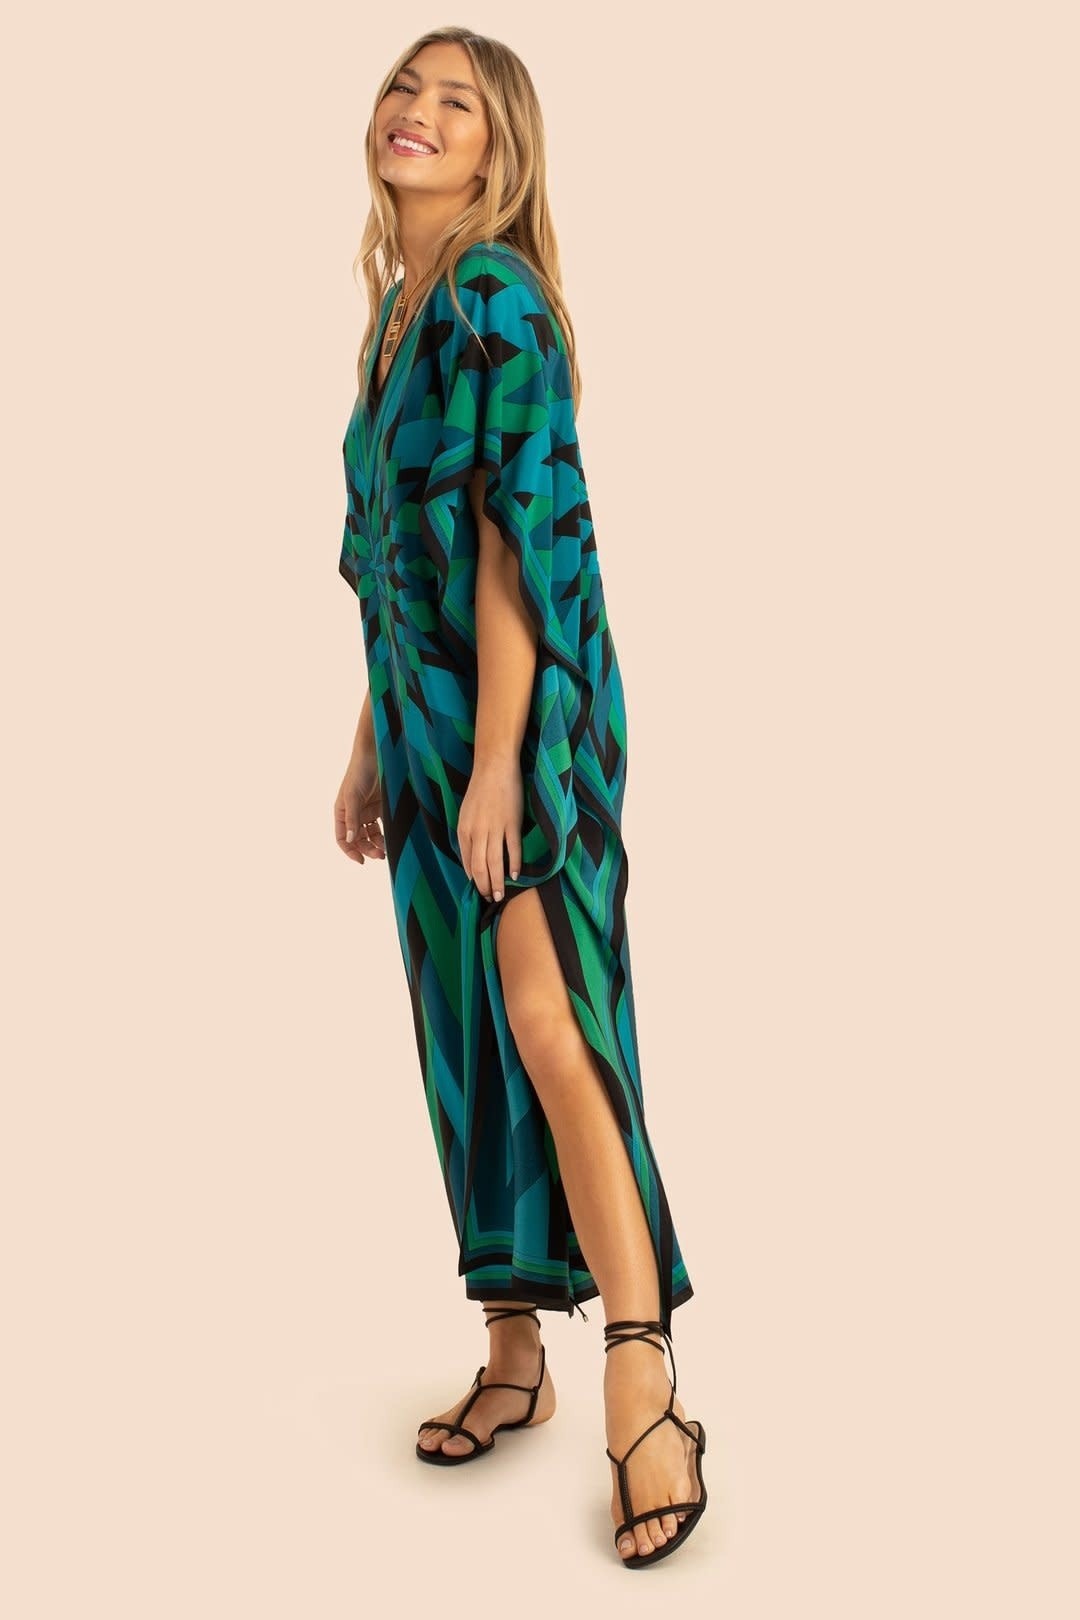 The model in the image is wearing Green Colour Soft Silk  Daily Wear Women Kaftan from Alice Milan. Crafted with the finest materials and impeccable attention to detail, the Kaftan / Dress looks premium, trendy, luxurious and offers unparalleled comfort. It’s a perfect clothing option for loungewear, resort wear, party wear or for an airport look. The woman in the image looks happy, and confident with her style statement putting a happy smile on her face.